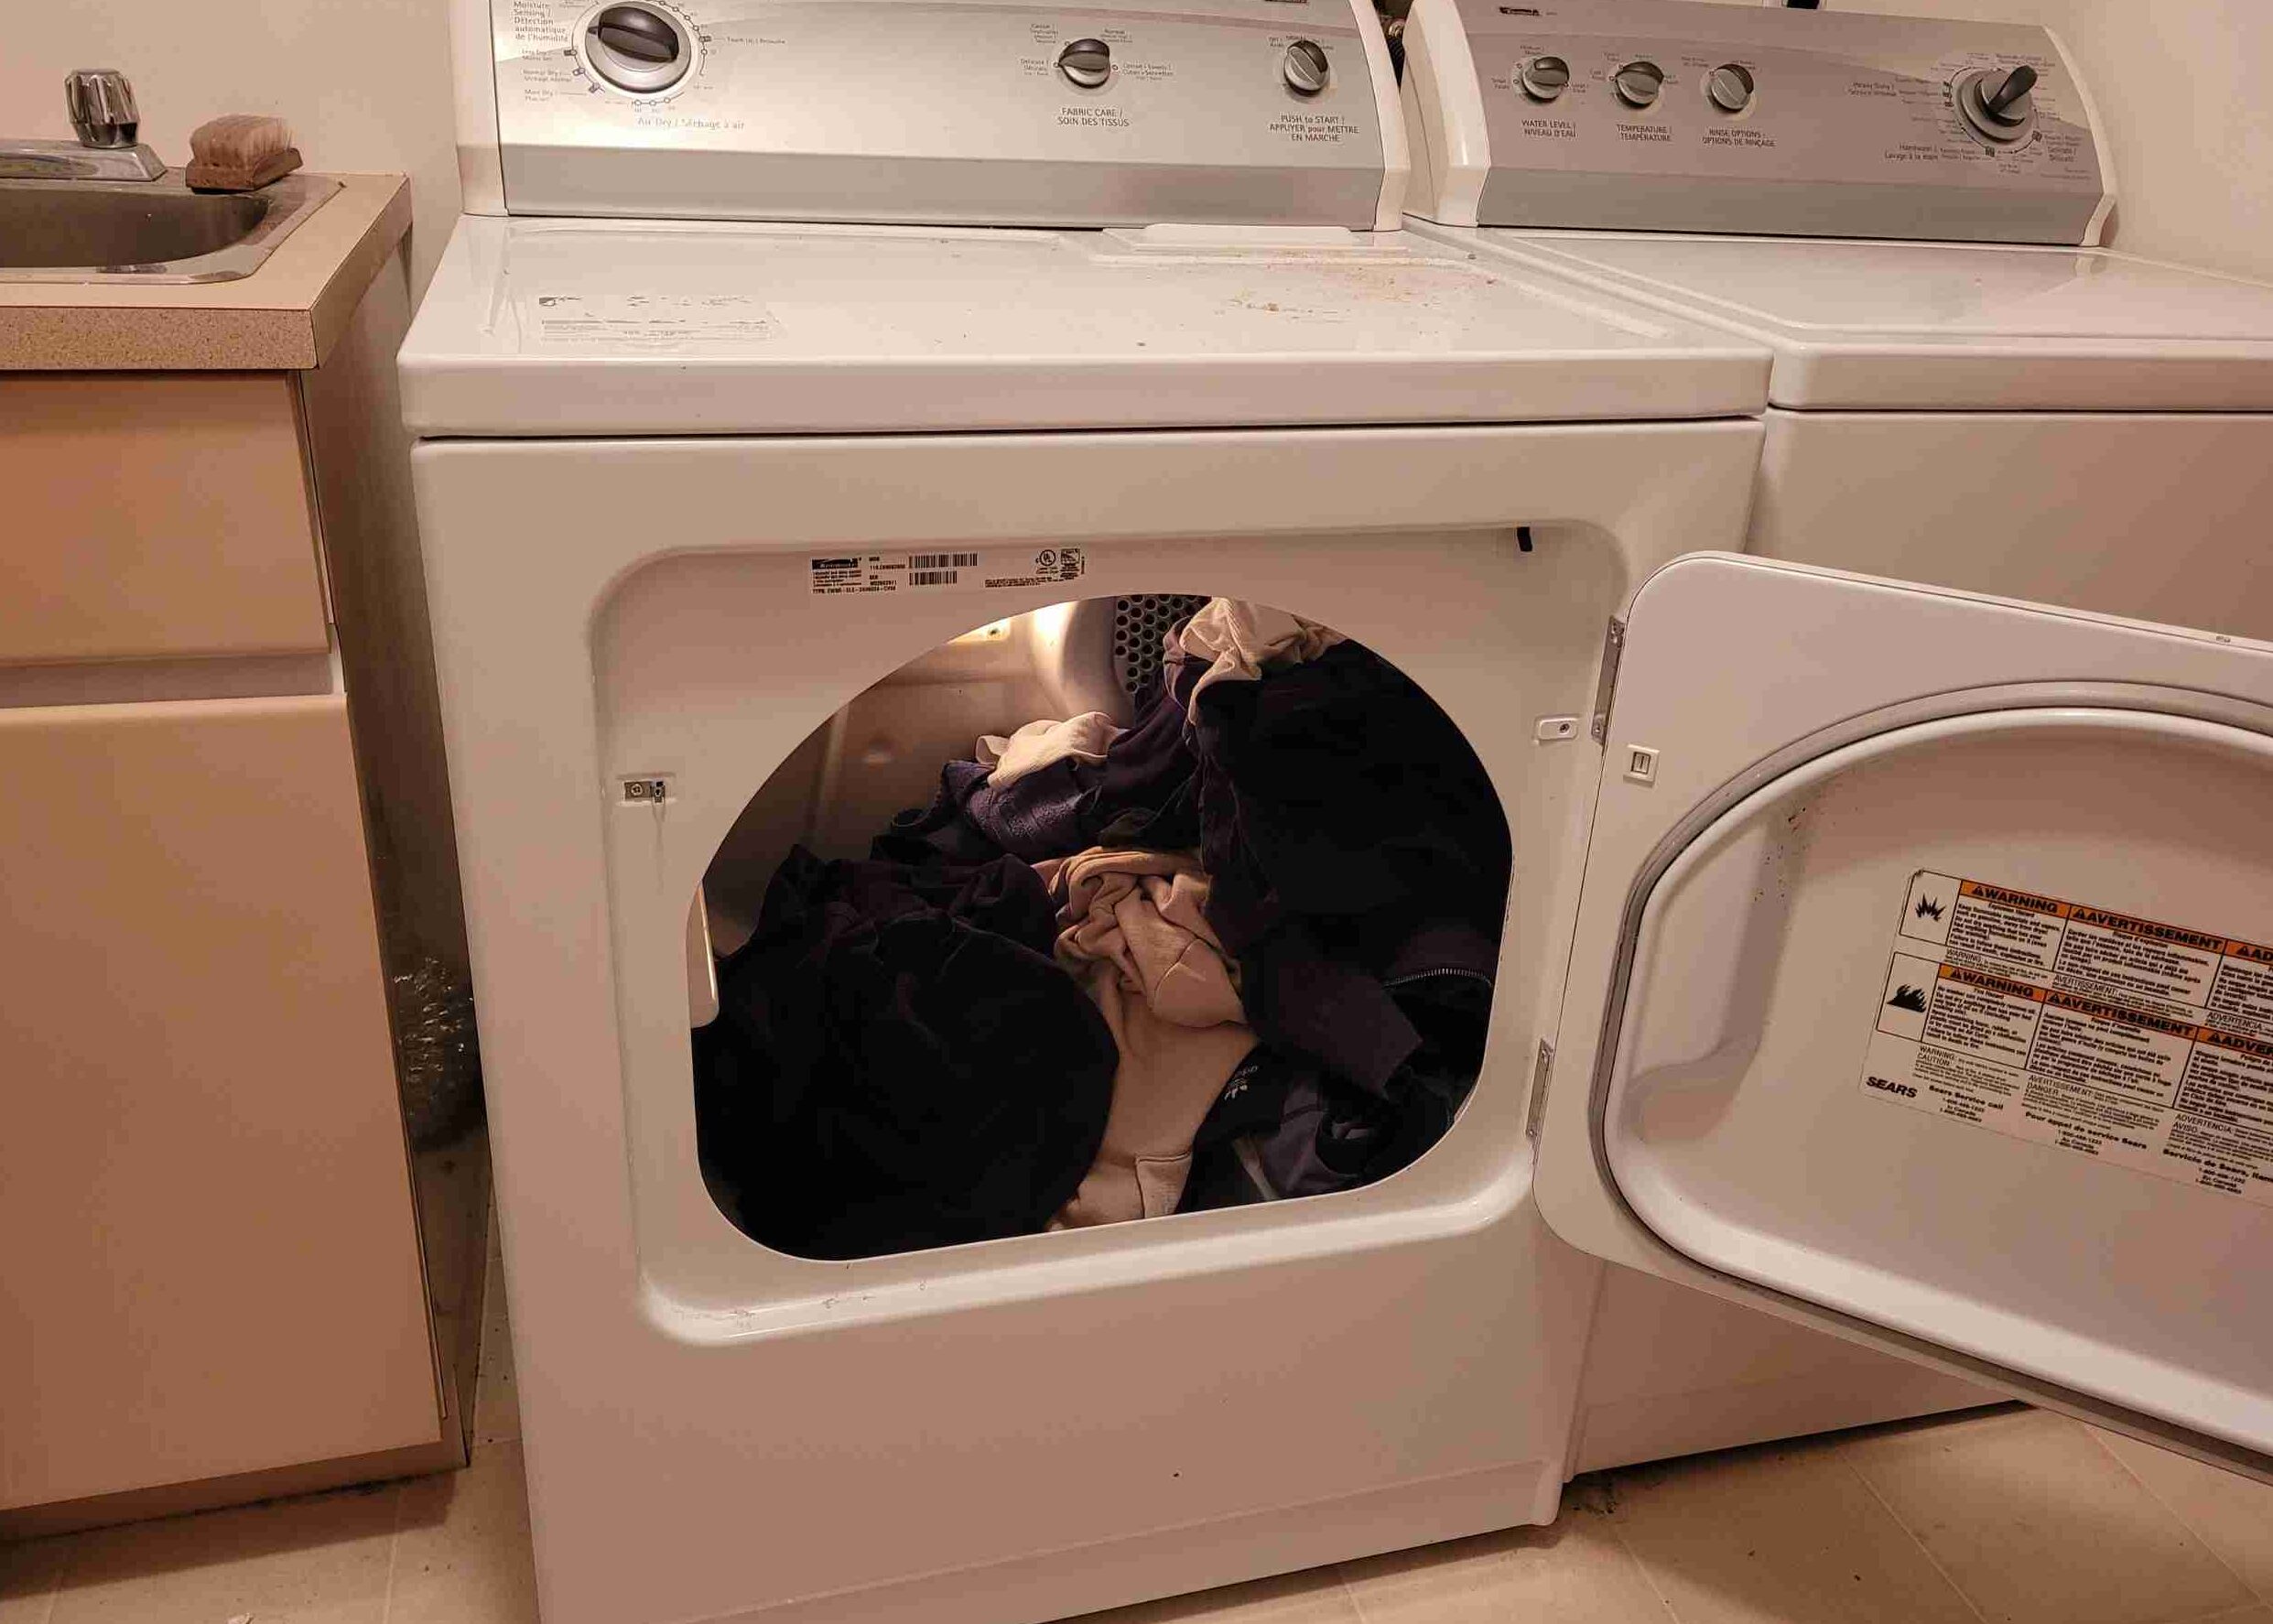 A close-up of a clothes dryer with warm-toned laundry inside. The caption reads, "Exploring dryer temperatures: Unveiling the Heat and understanding how hot dryers can get."